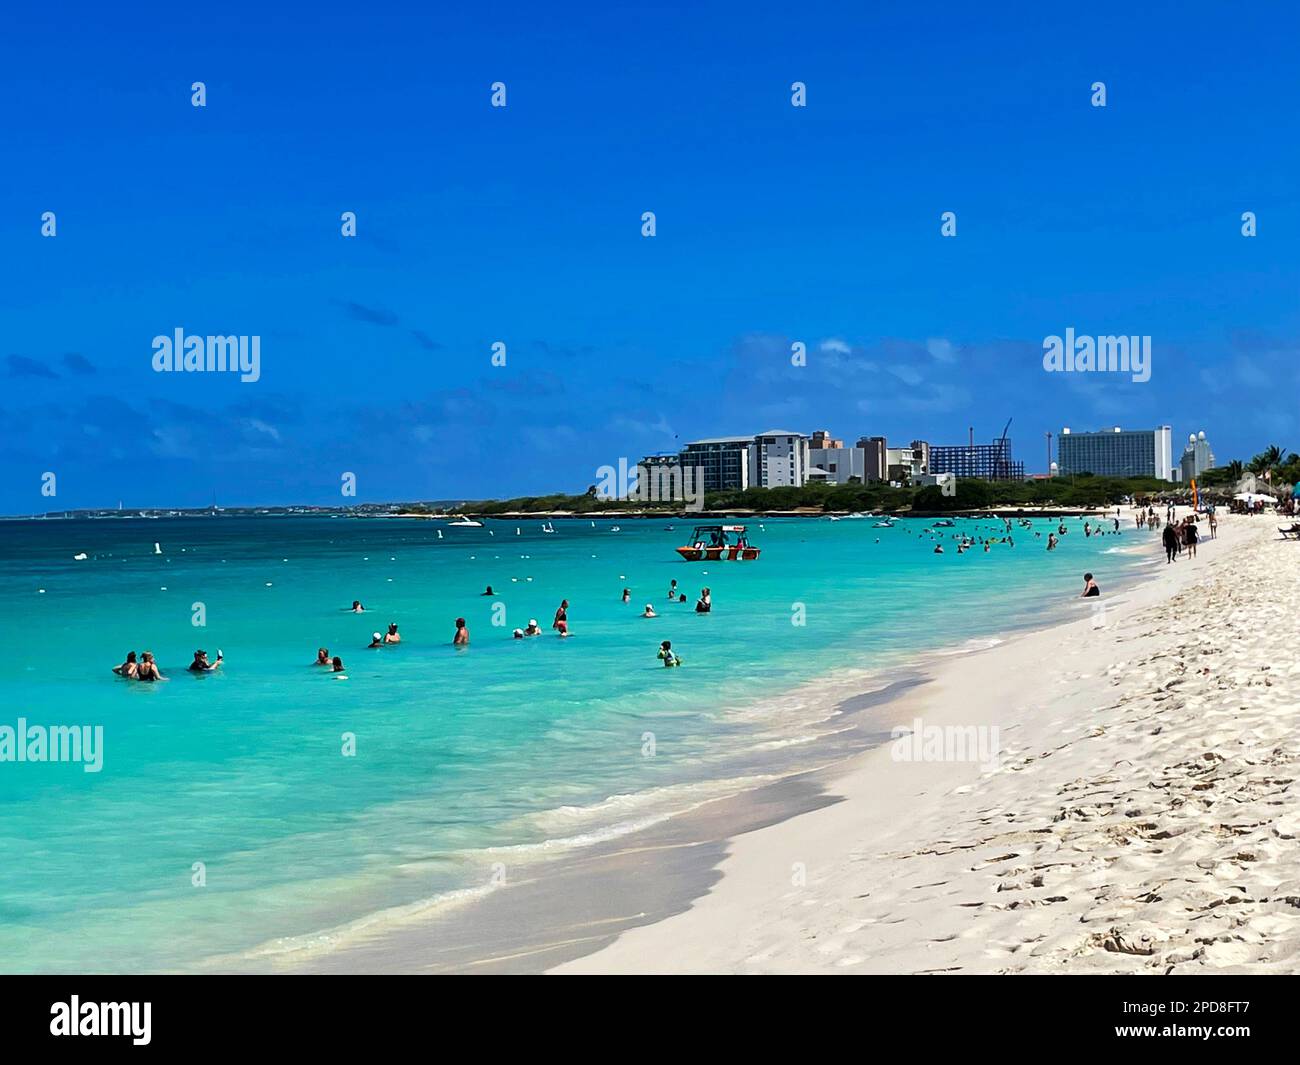 Eagle Beach, Oranjestad, Aruba, March 10, 2022. People on the beach and in the water. Hotels and resort buildings in the background. Stock Photo